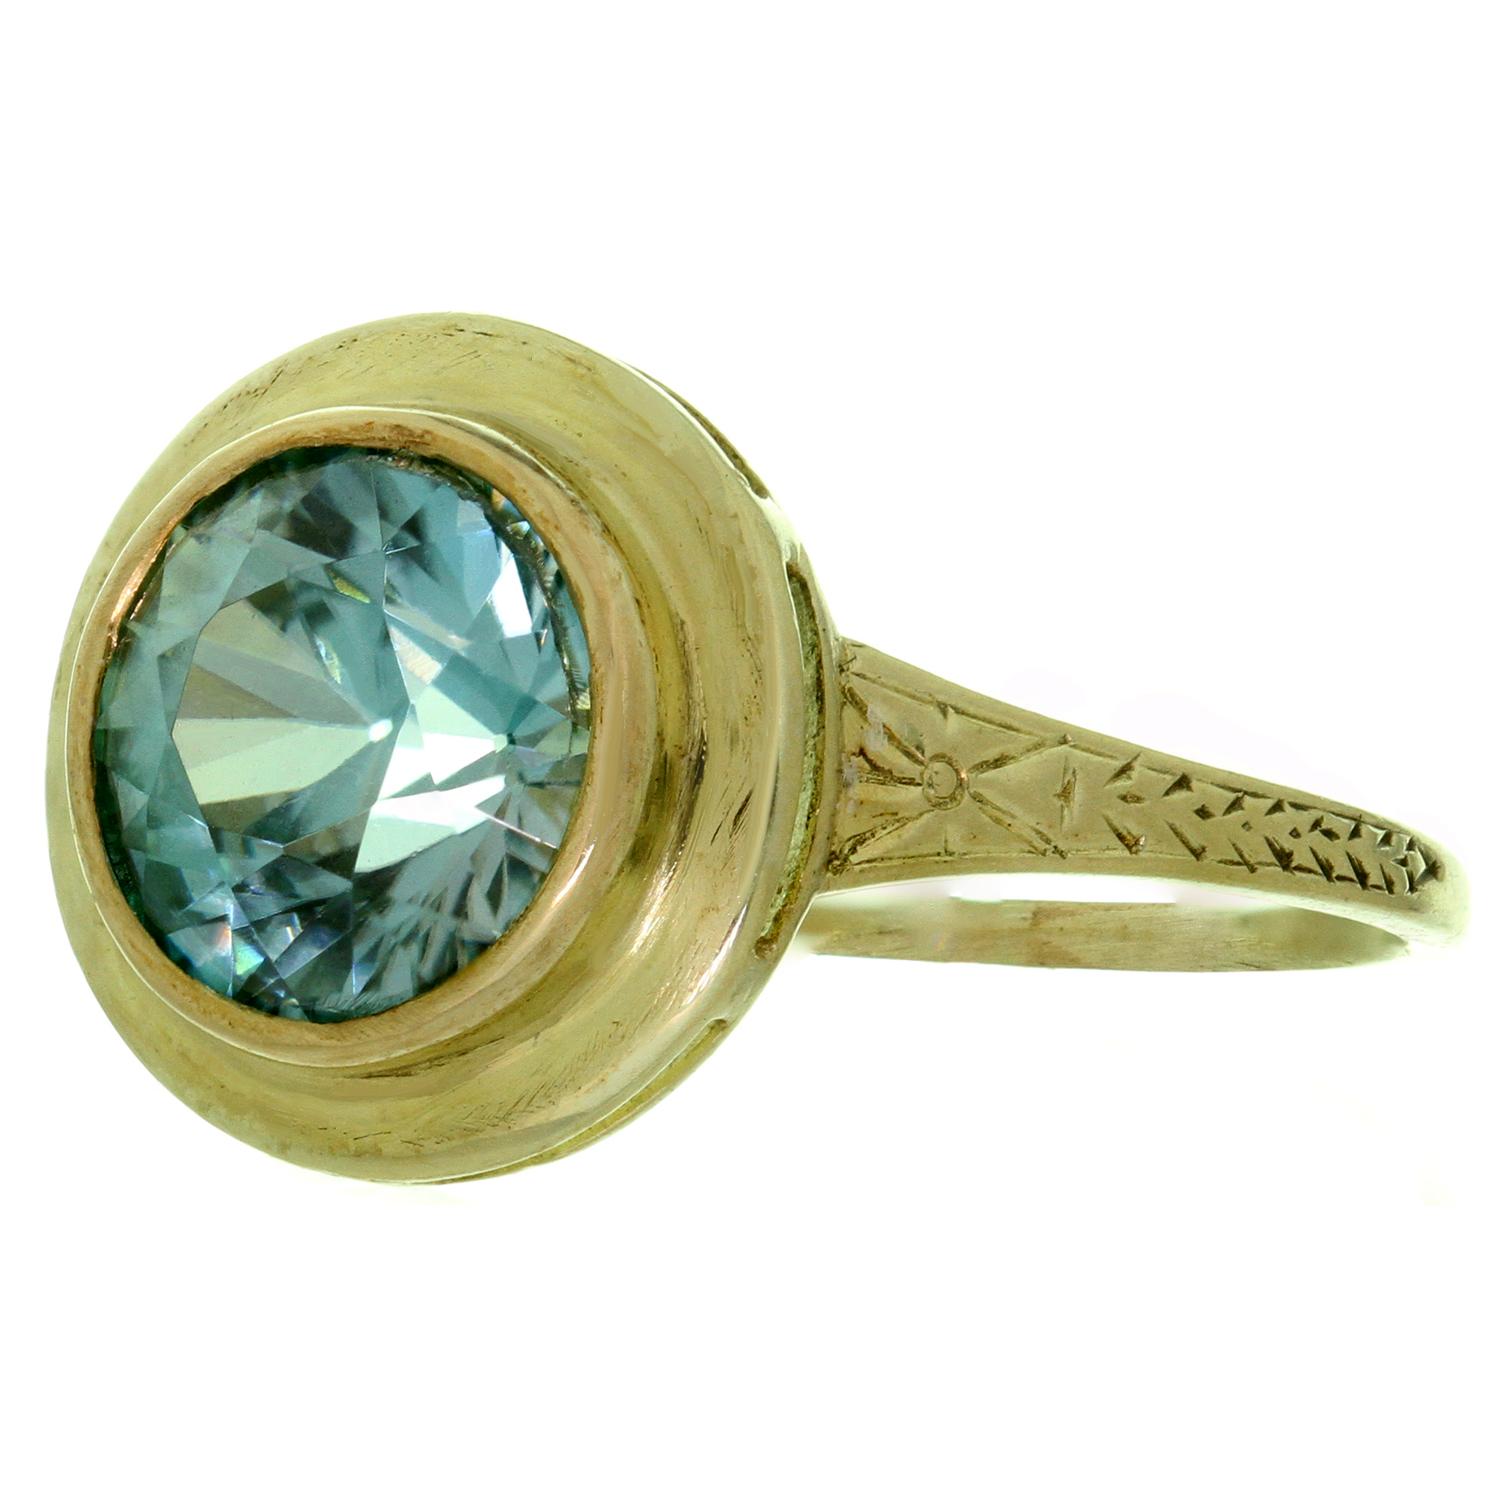 This fabulous antique ring features a delicate filigree design hand-crafted in 14k yellow gold and set with a sparkling round diamond-cut blue quartz. Made in United States circa 1950s. Measurements: 0.43